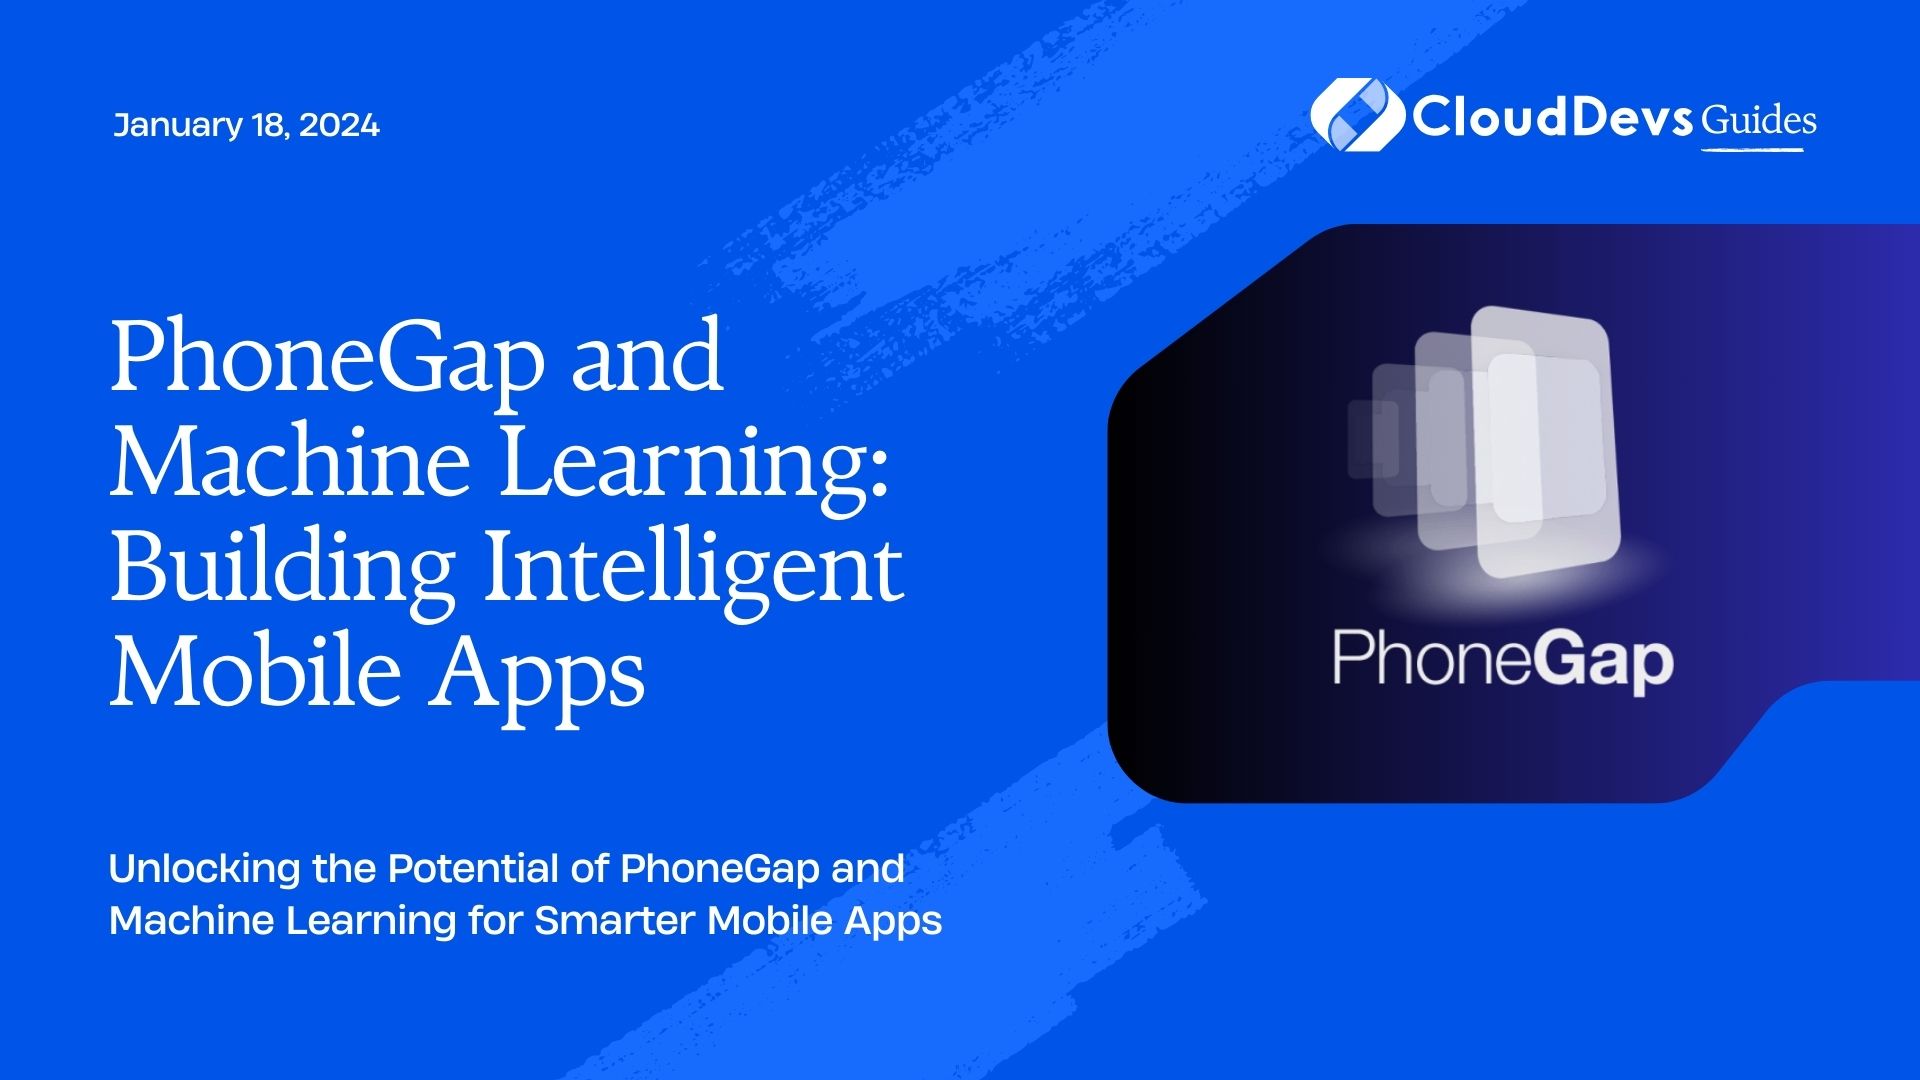 PhoneGap and Machine Learning: Building Intelligent Mobile Apps